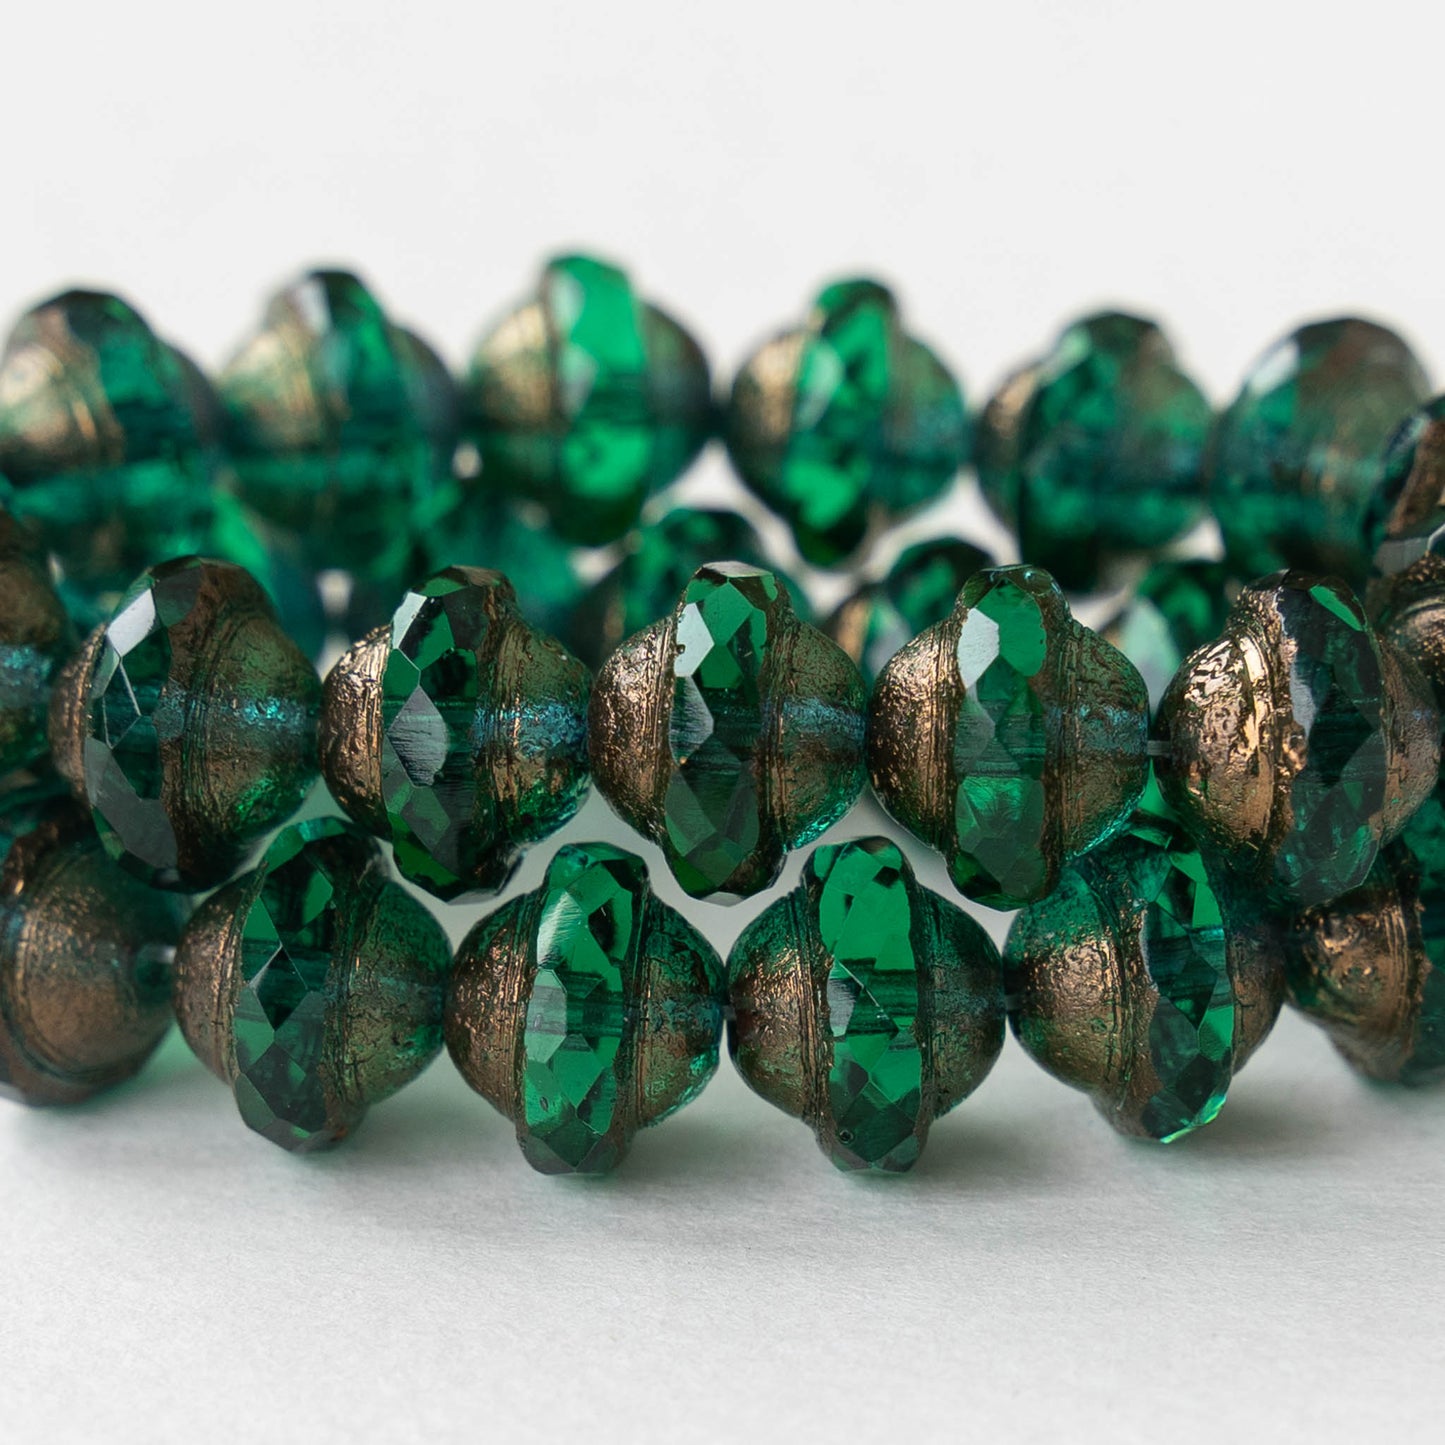 8x10mm Saturn Beads - Emerald Green with Bronze- 15 Beads